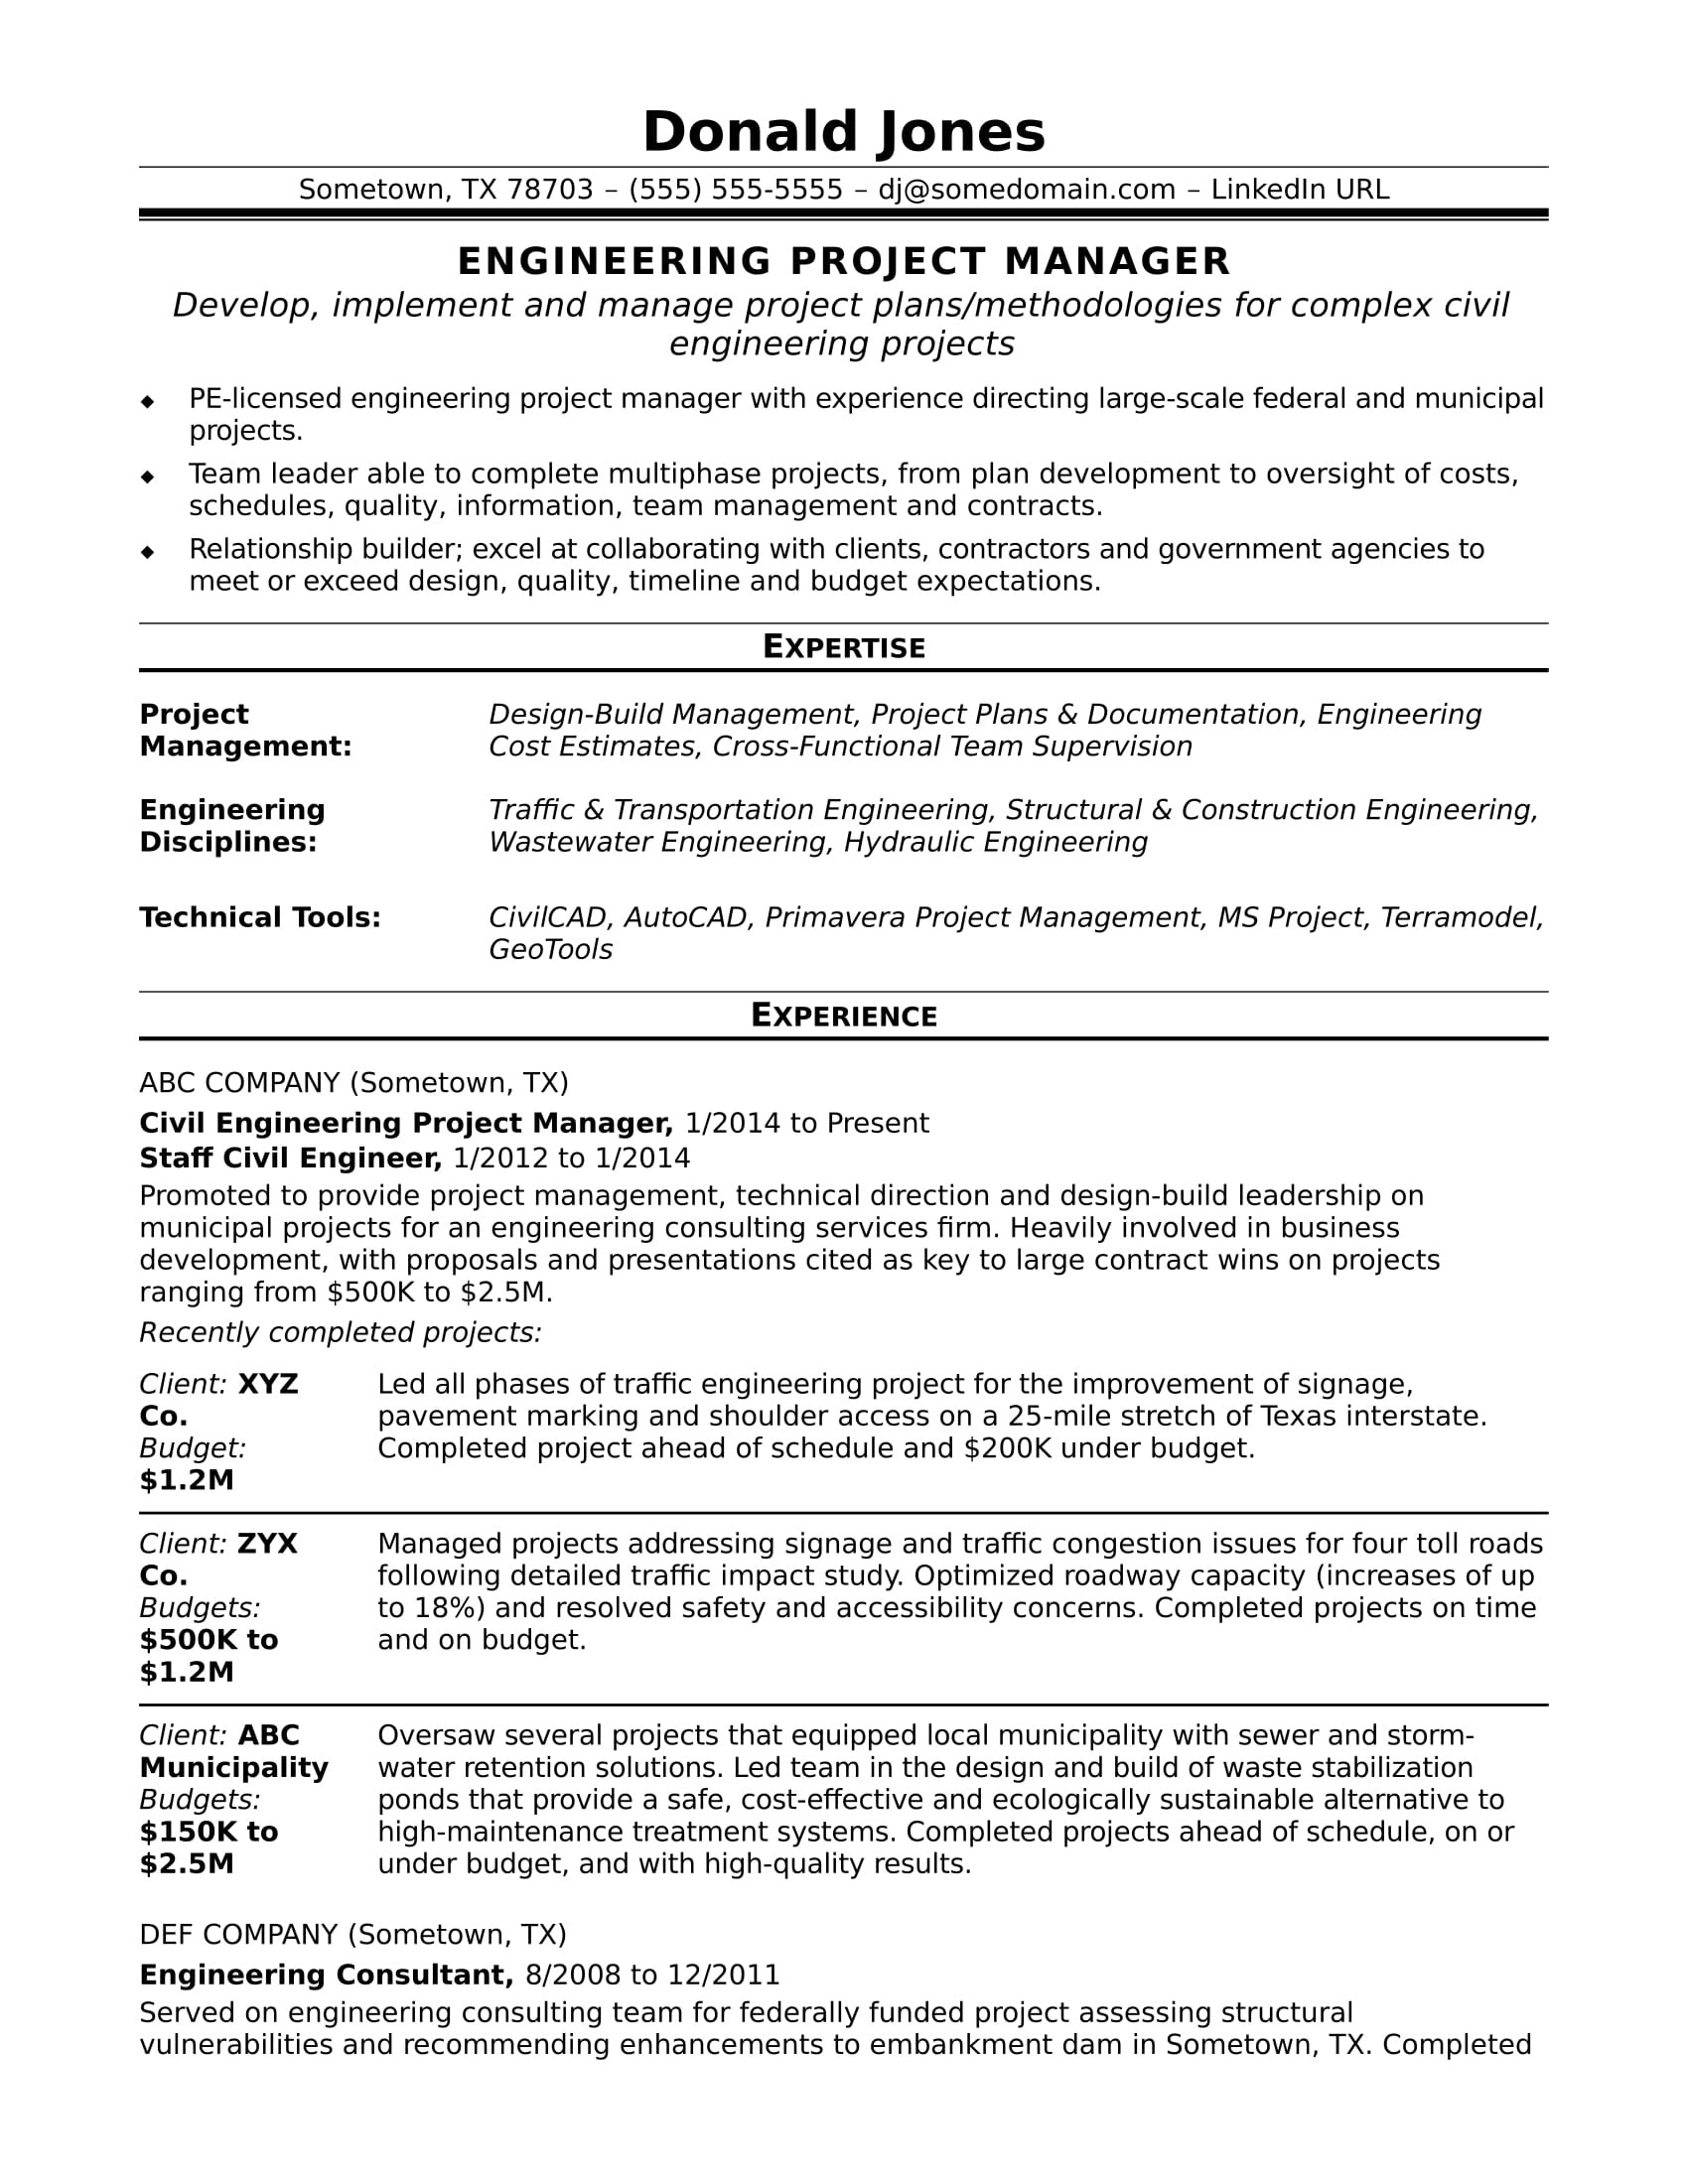 Functional Resume Sample for Project Manager Sample Resume for A Midlevel Engineering Project Manager Monster.com